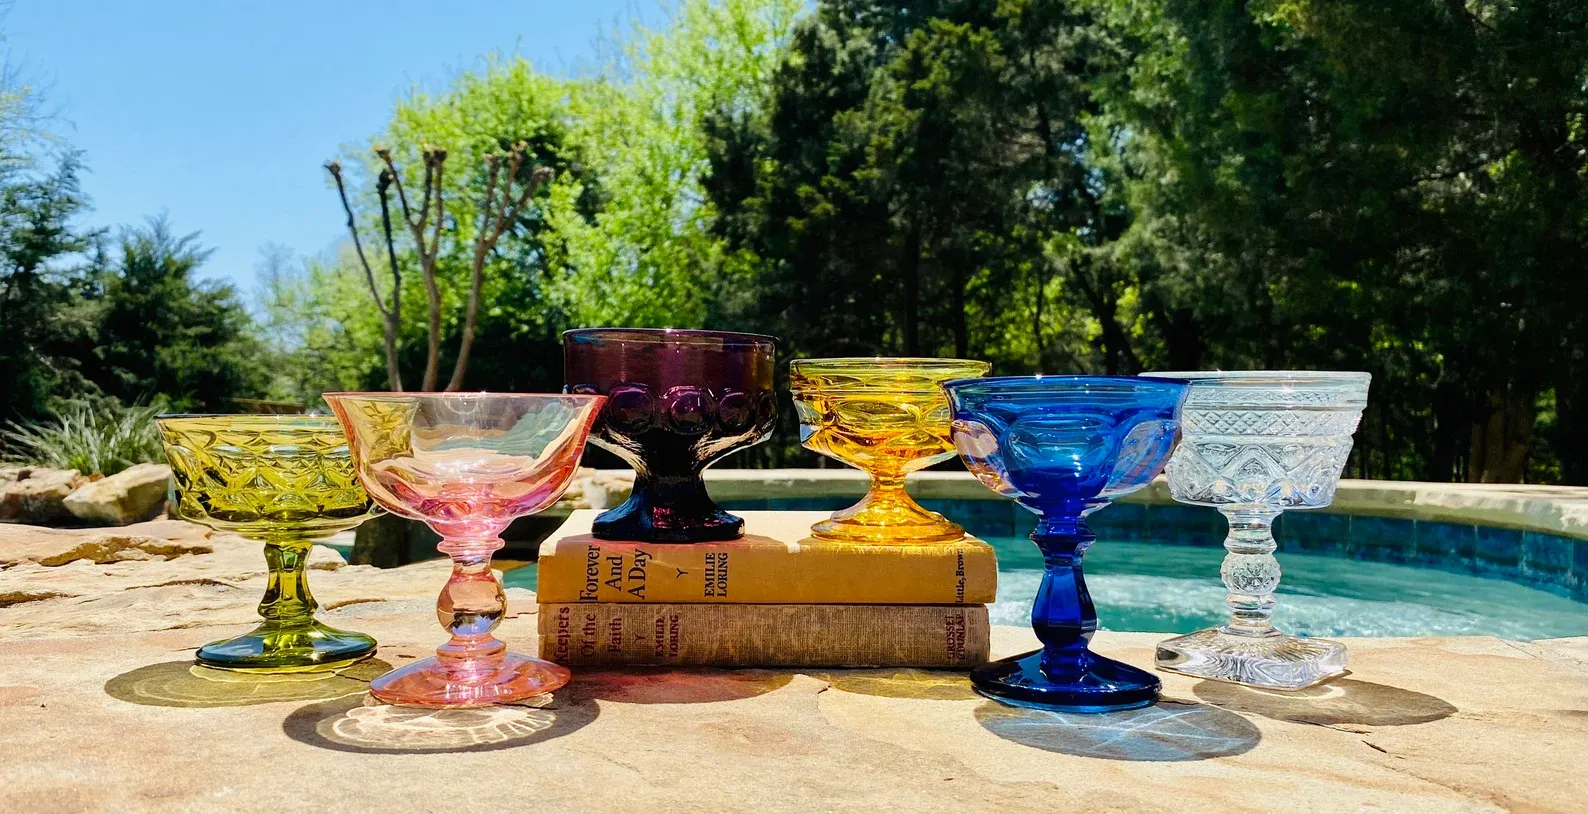 https://cdn.apartmenttherapy.info/image/upload/v1656523590/gen-workflow/product-database/etsy-vintage-rainbow-champagne-coupes.webp